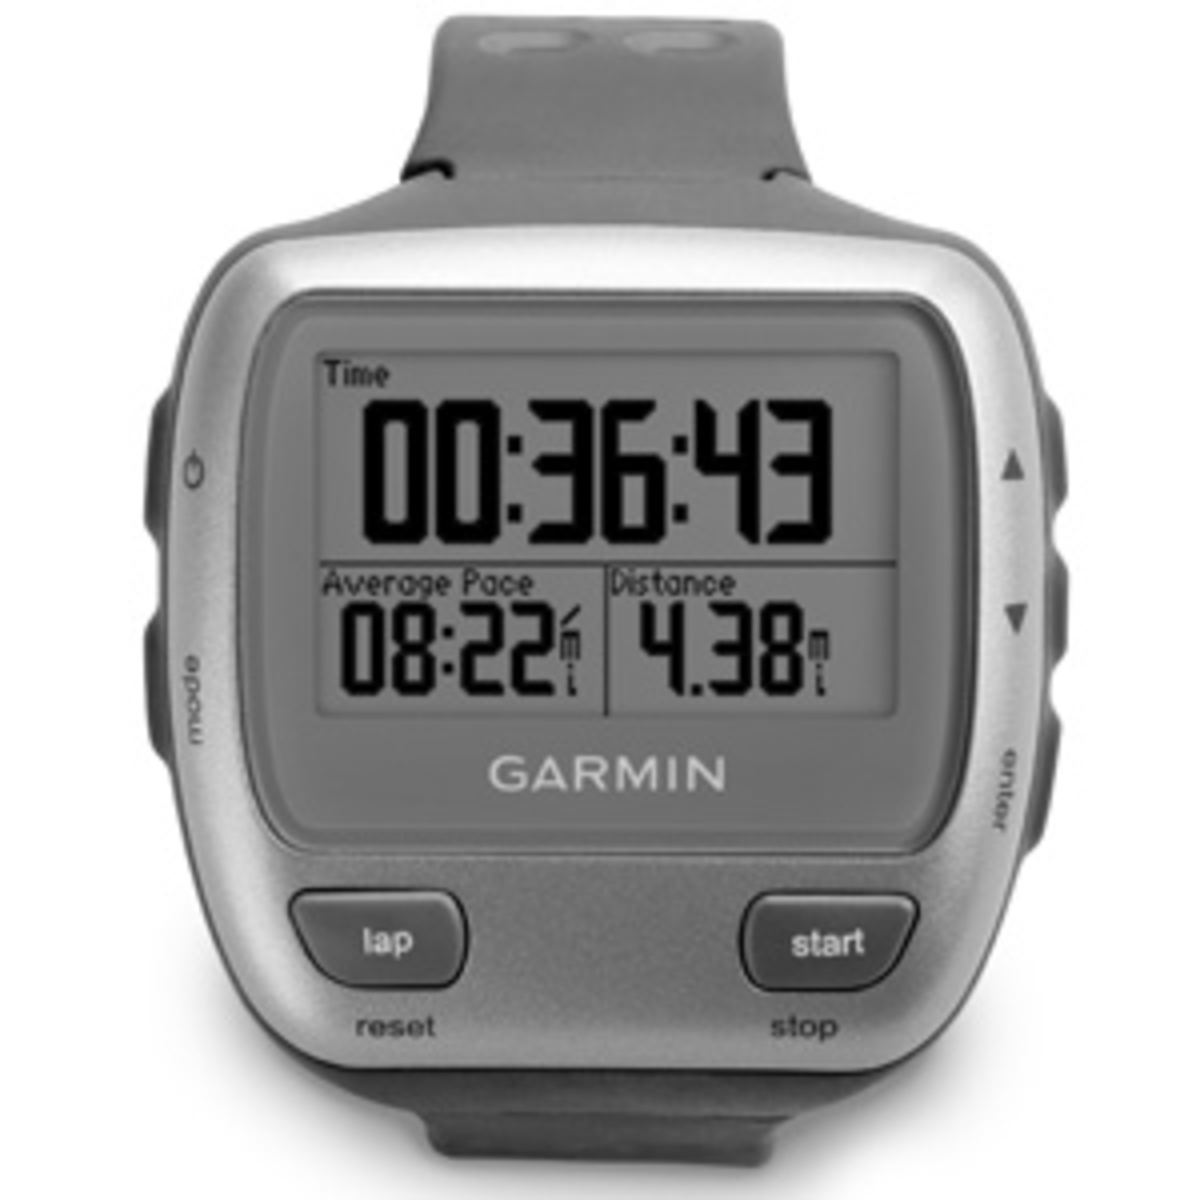 Garmin came out with a number of new watches this past summer. Photo courtesy of Garmin.com.